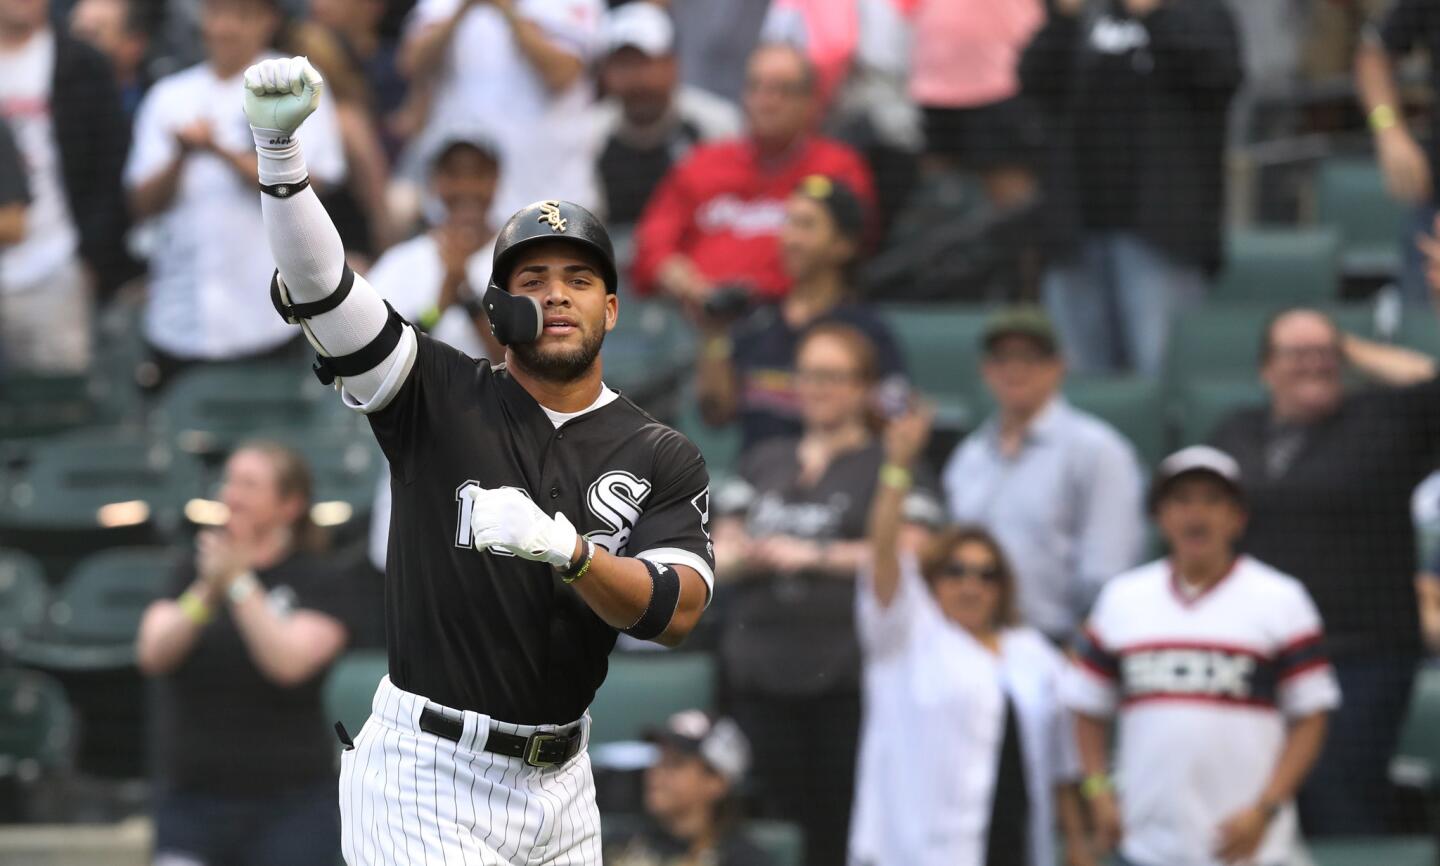 Yoan Moncada celebrates after hitting a solo homer in the first inning of a game against the Indians at Guaranteed Rate Field on Tuesday, June 12, 2018.